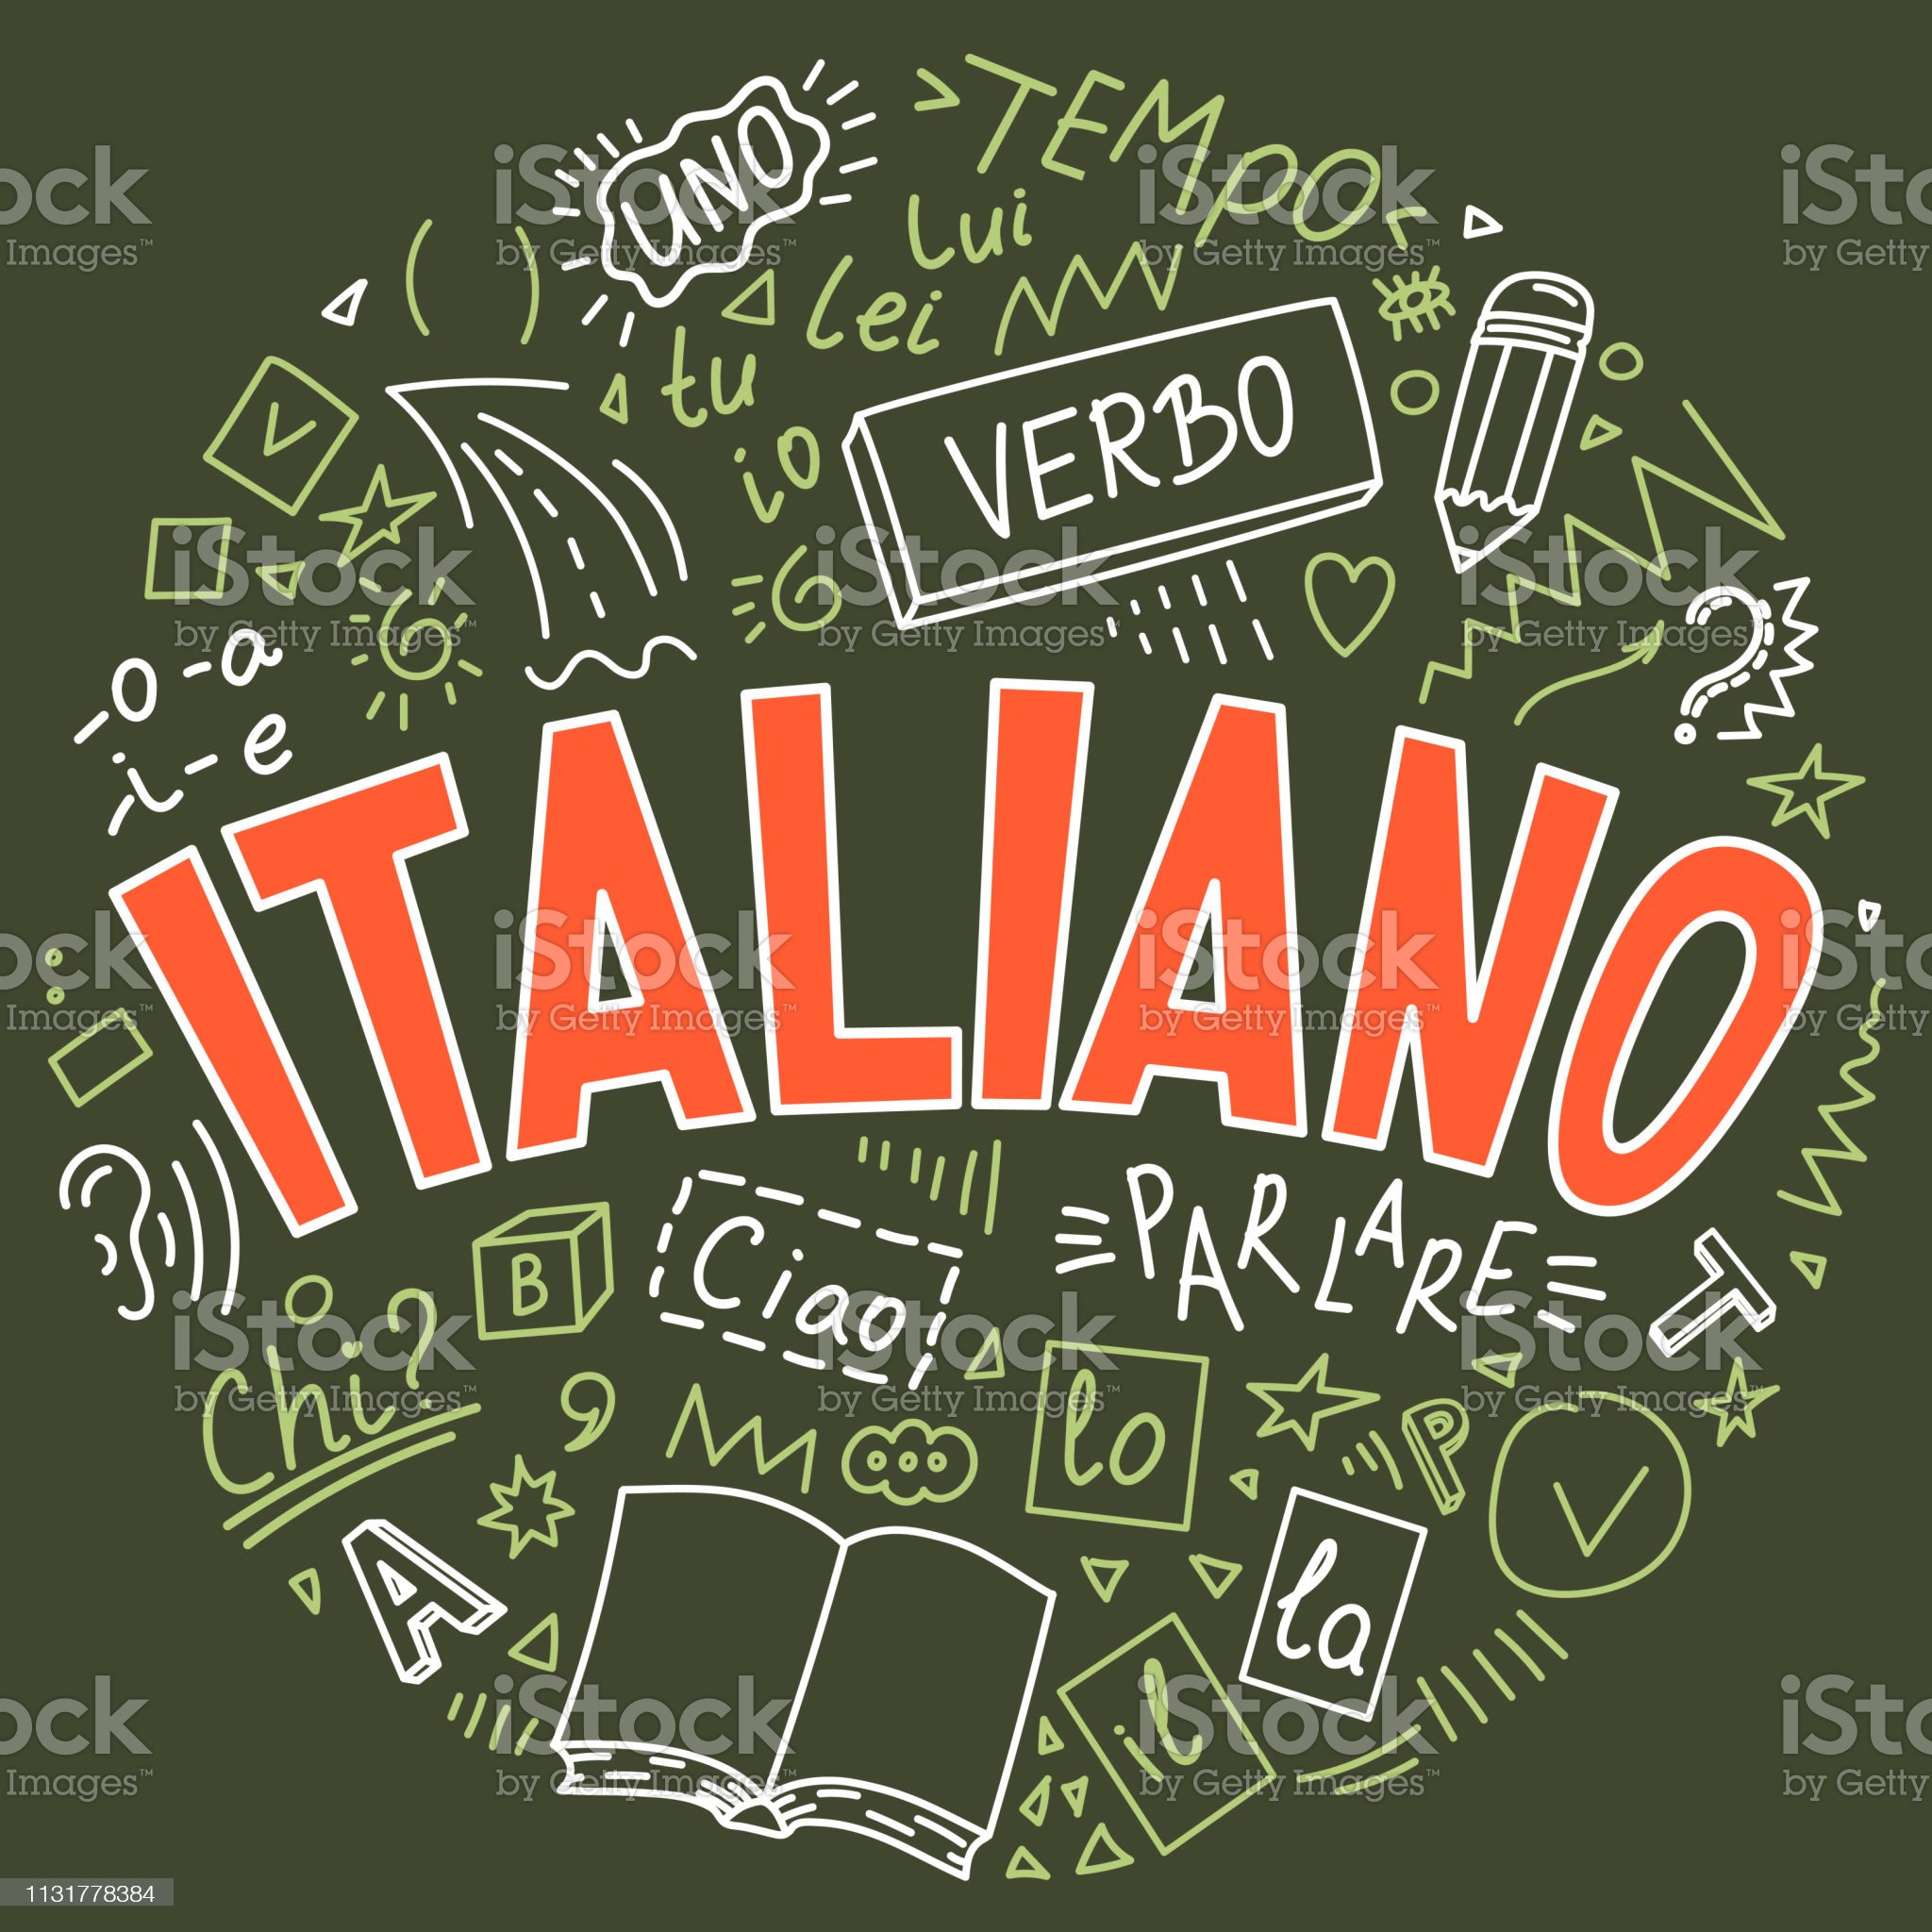 Not only exchange: free Italian Lessons (A1-A2)